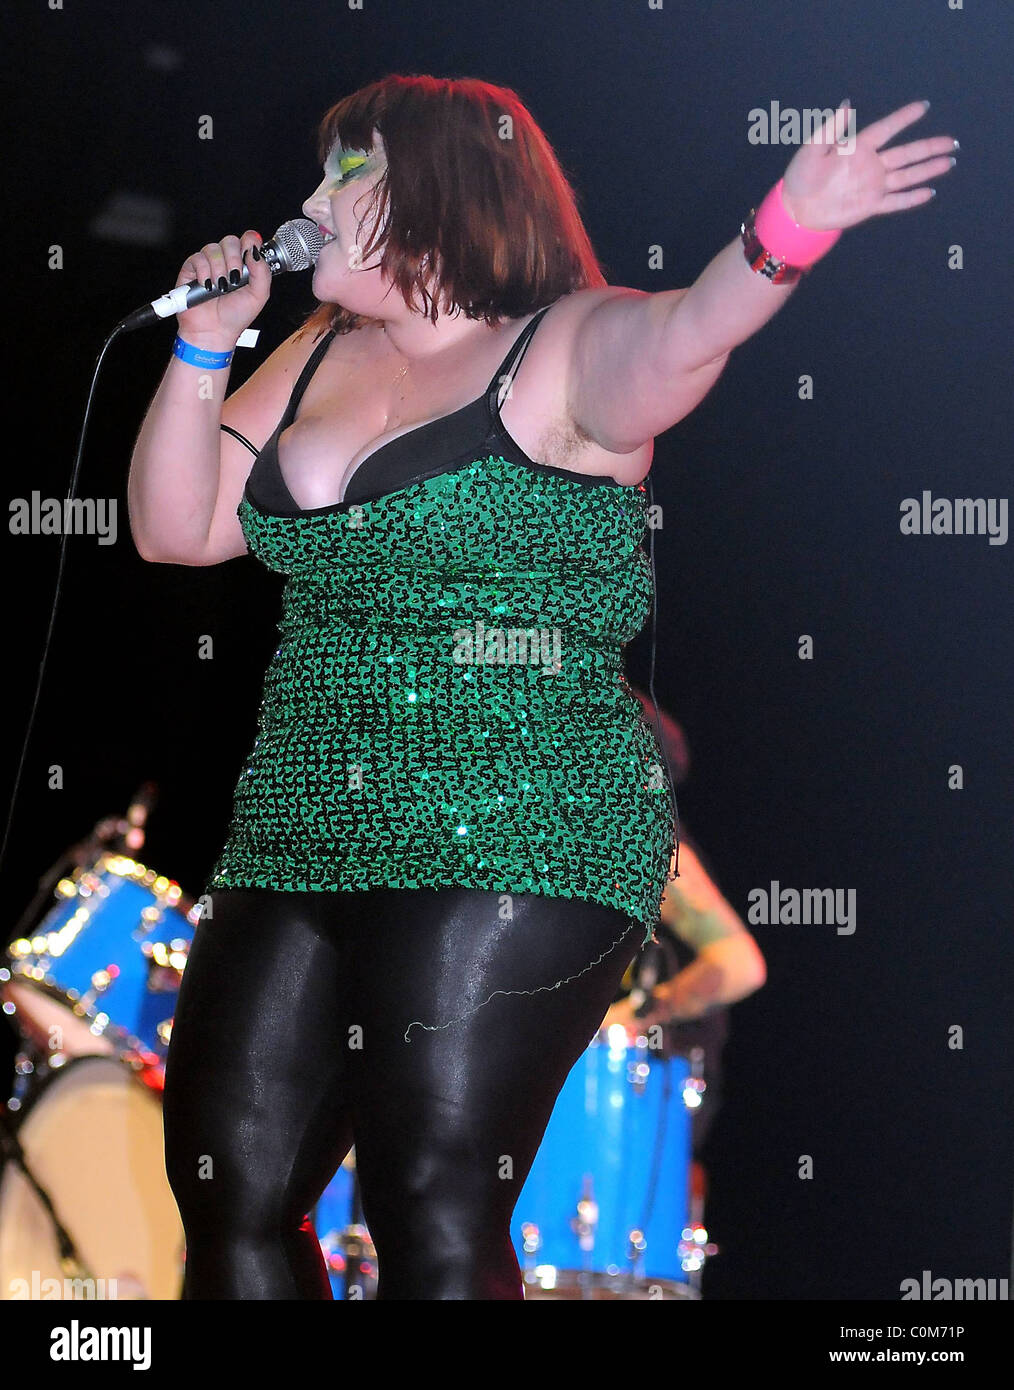 Beth Ditto of The Gossip Performing at Day 3 of The Electric Picnic Festival County Laois, Ireland - 31.08.08 ** ** Stock Photo